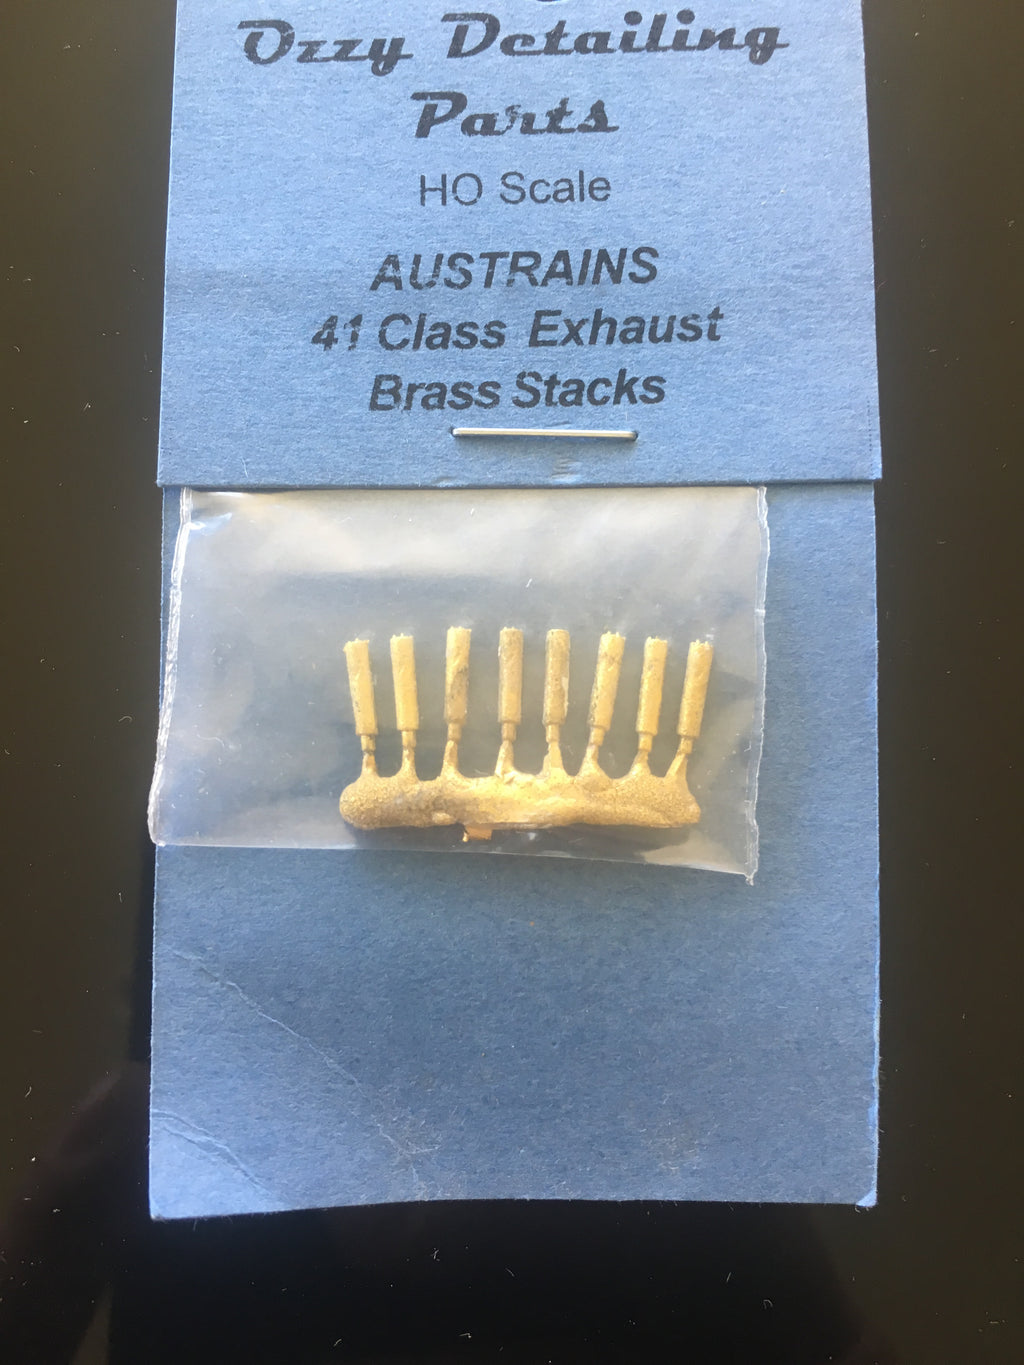 Diesel - Smoke Stack #111 for 41 Class NSWR LOCOMOTIVE Exhausts Stacks  - Ozzy Brass Parts #111